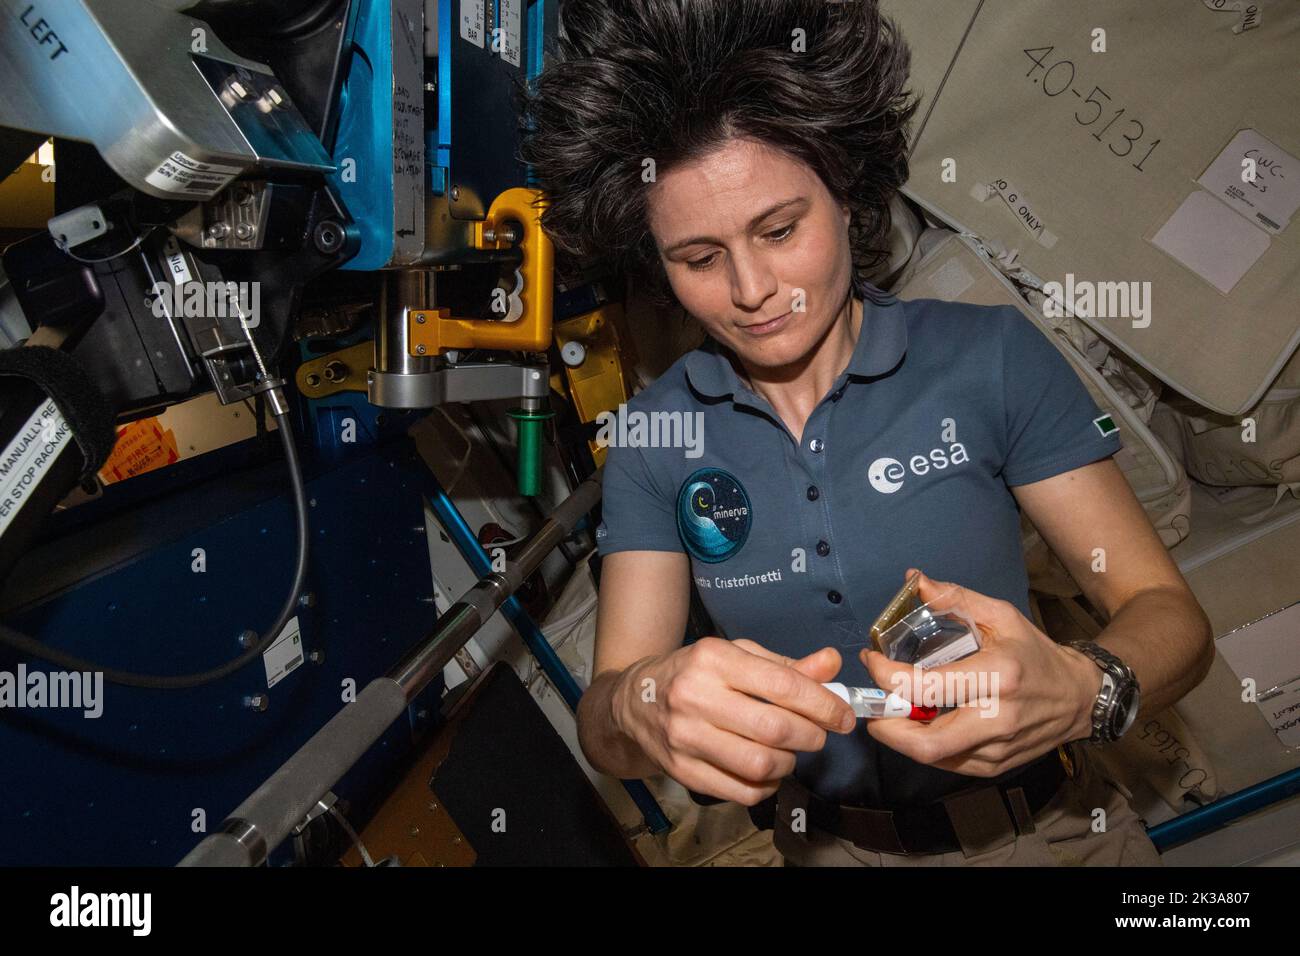 ISS - 08 September 2022 - Expedition 67 Flight Engineer Samantha Cristoforetti of ESA (European Space Agency) services microbe samples collected for a Stock Photo